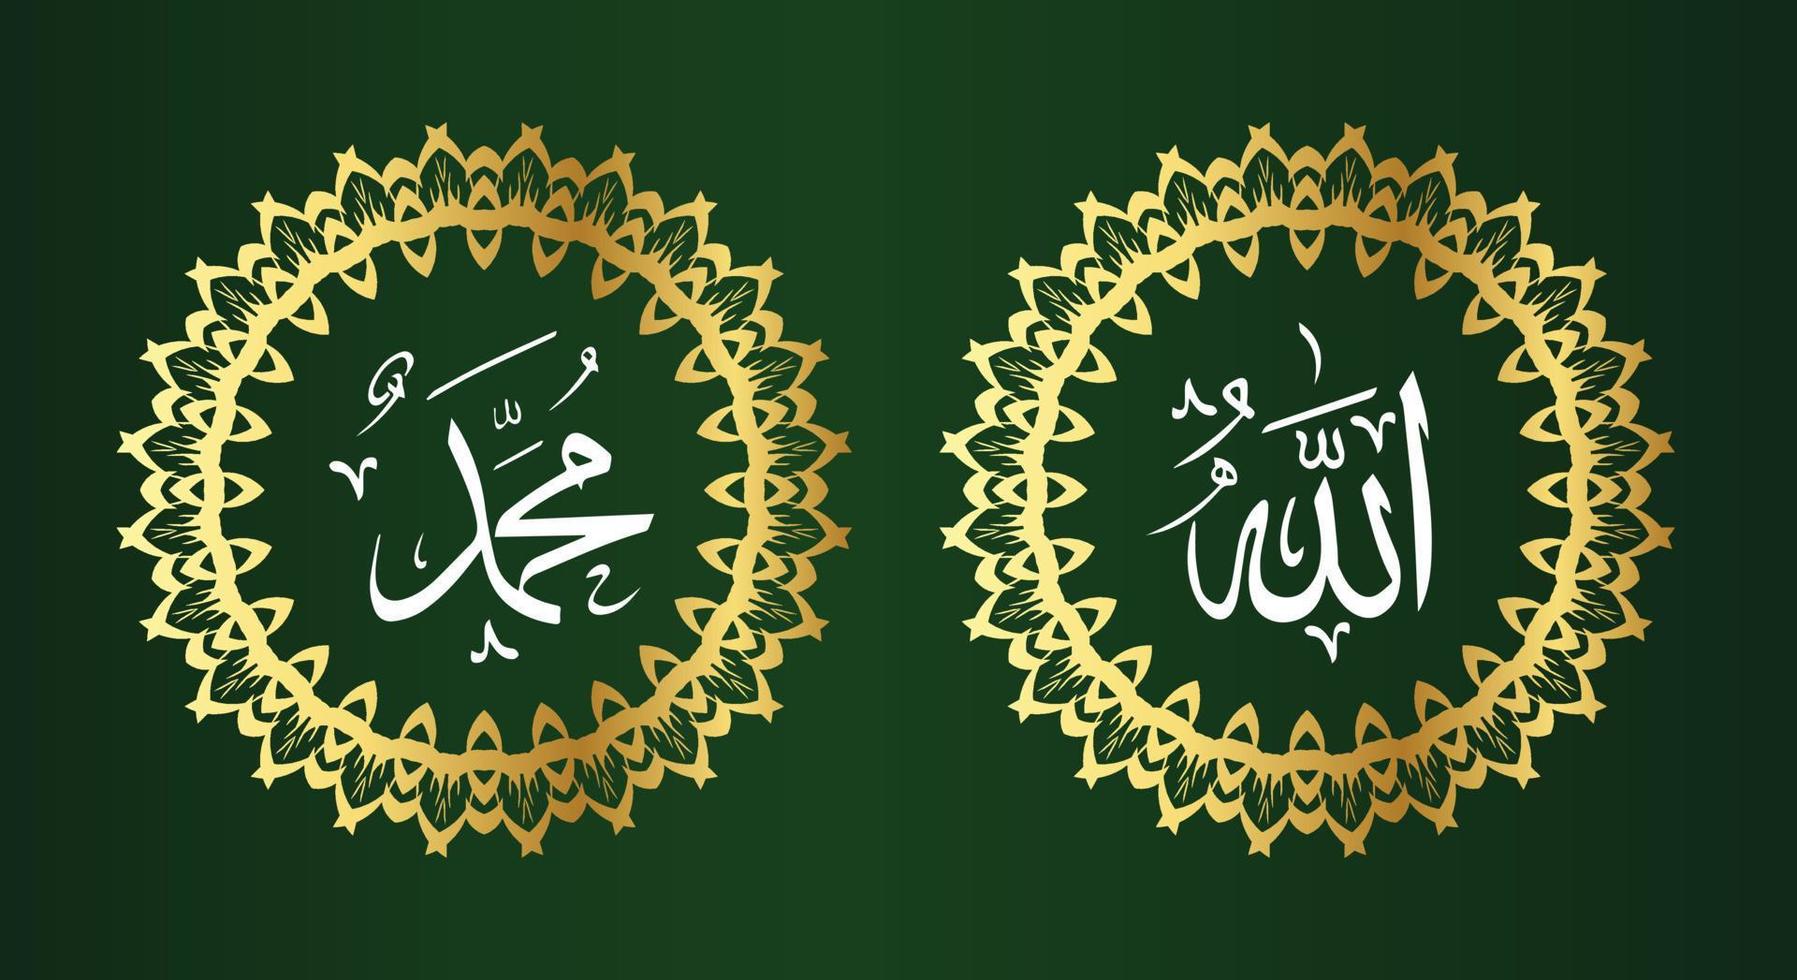 allah muhammad with circle frame and gold color on green background vector